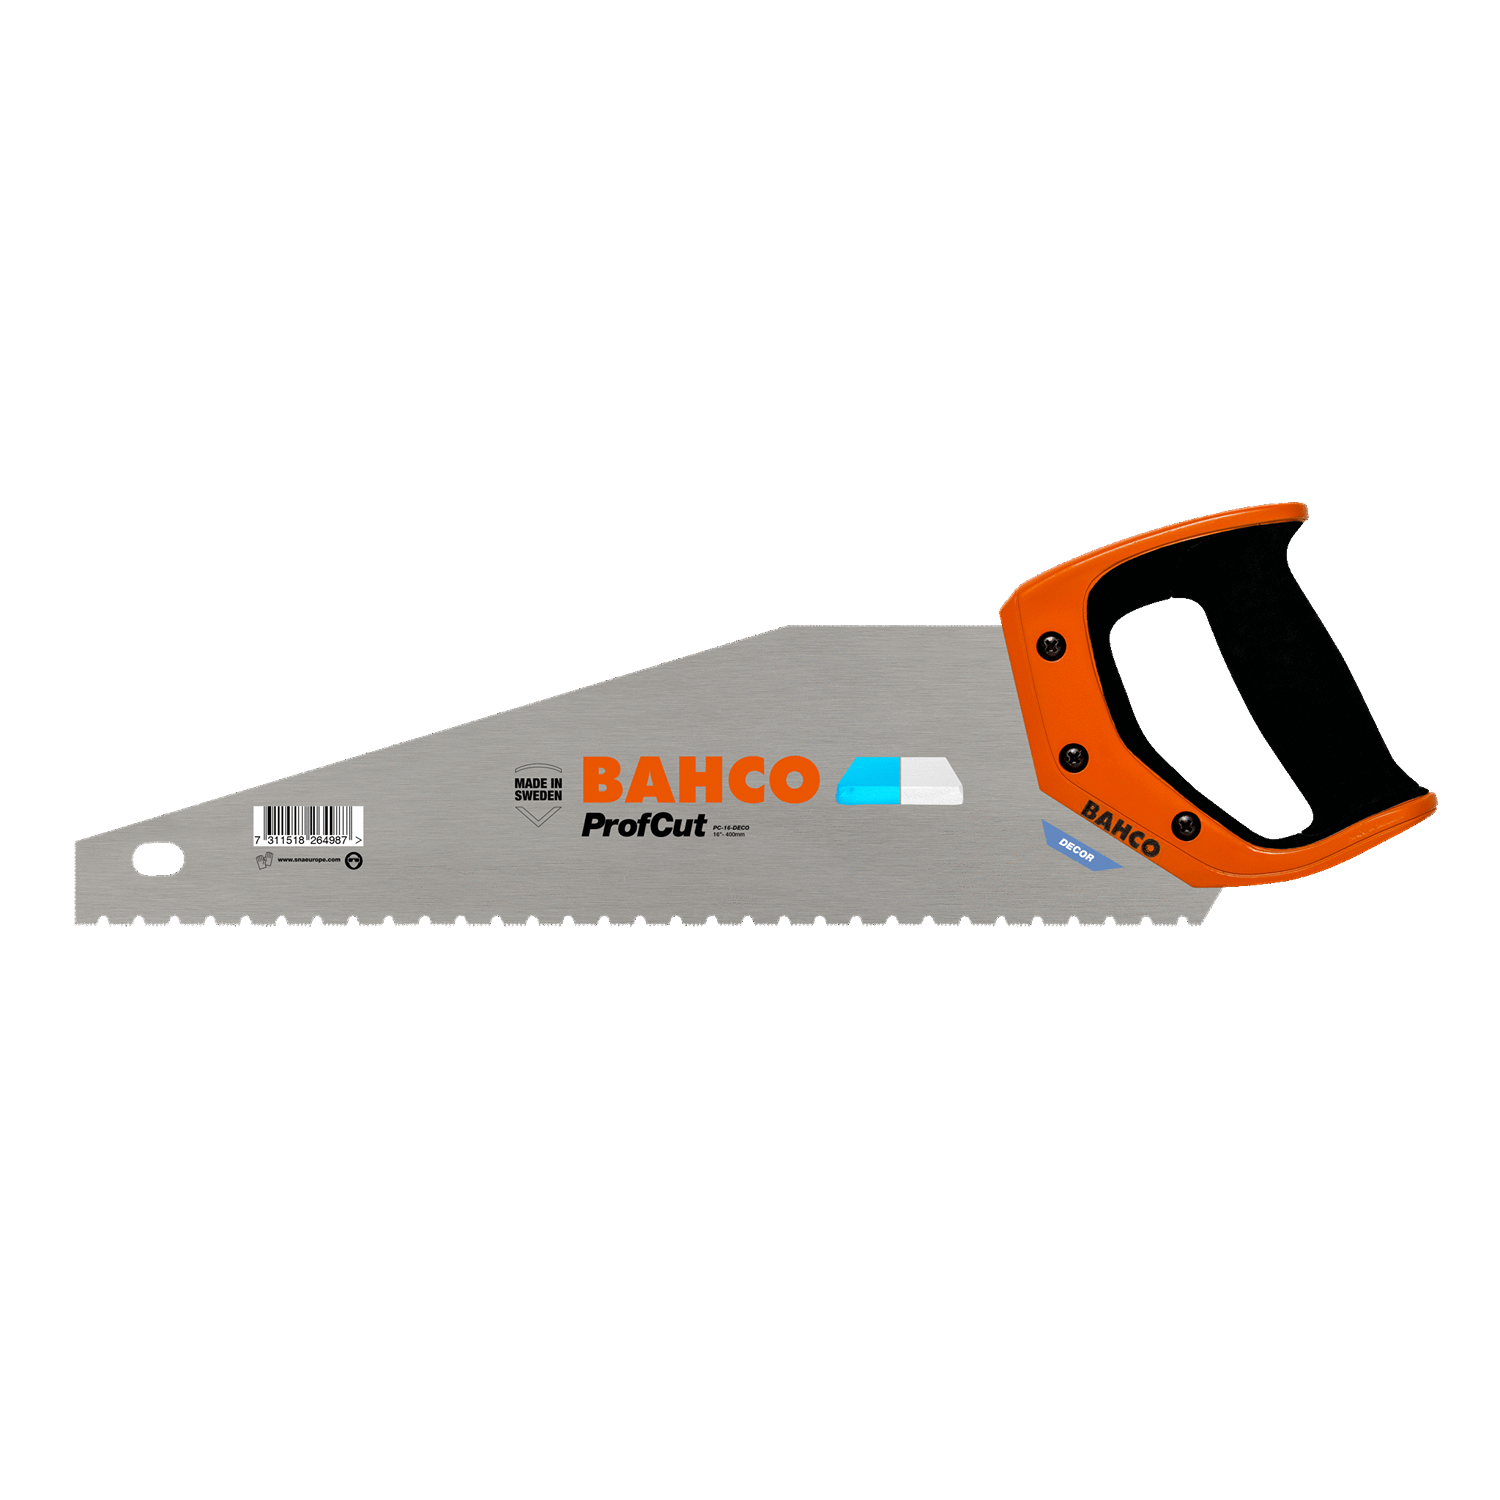 BAHCO PC-16-DECO ProfCut Handsaw for Polystyrene - 18"/19" - Premium Handsaw from BAHCO - Shop now at Yew Aik.